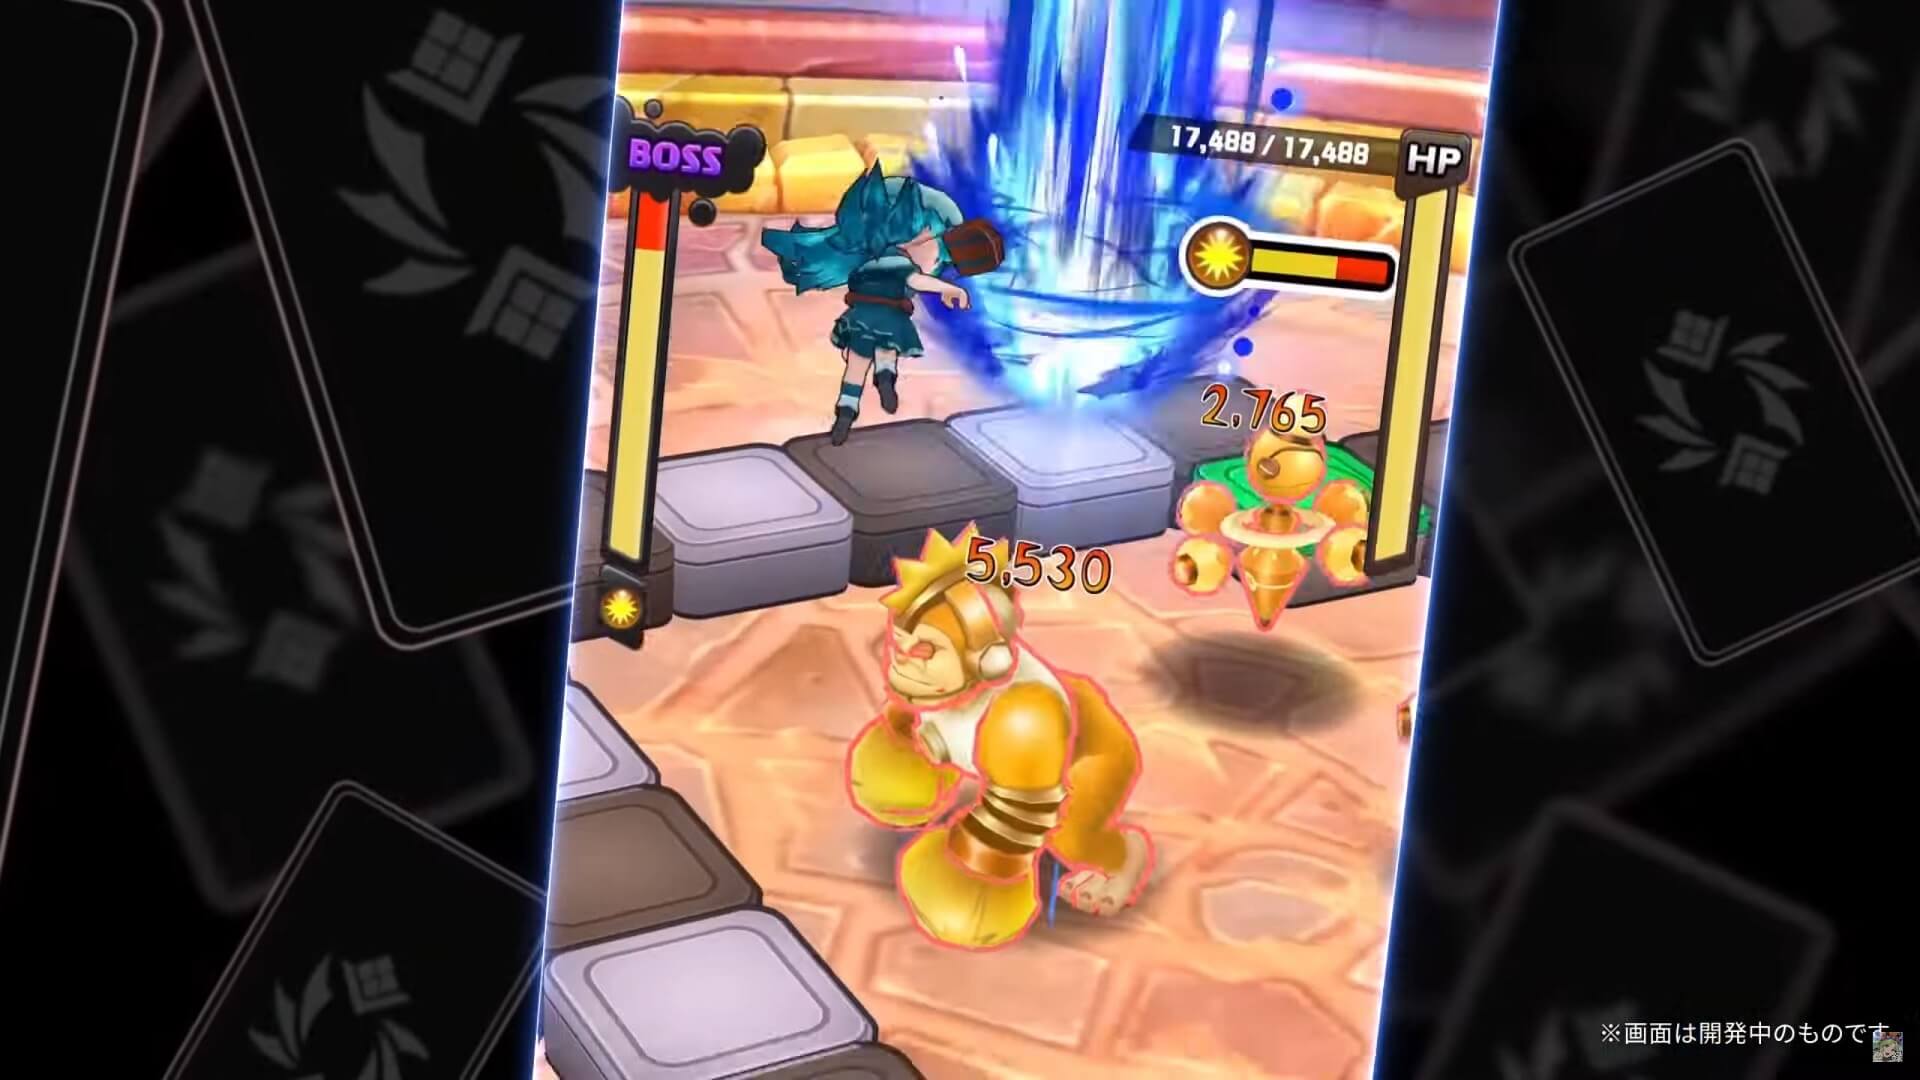 Hero Dice, the Tango Gameworks mobile game that will shut down later this year